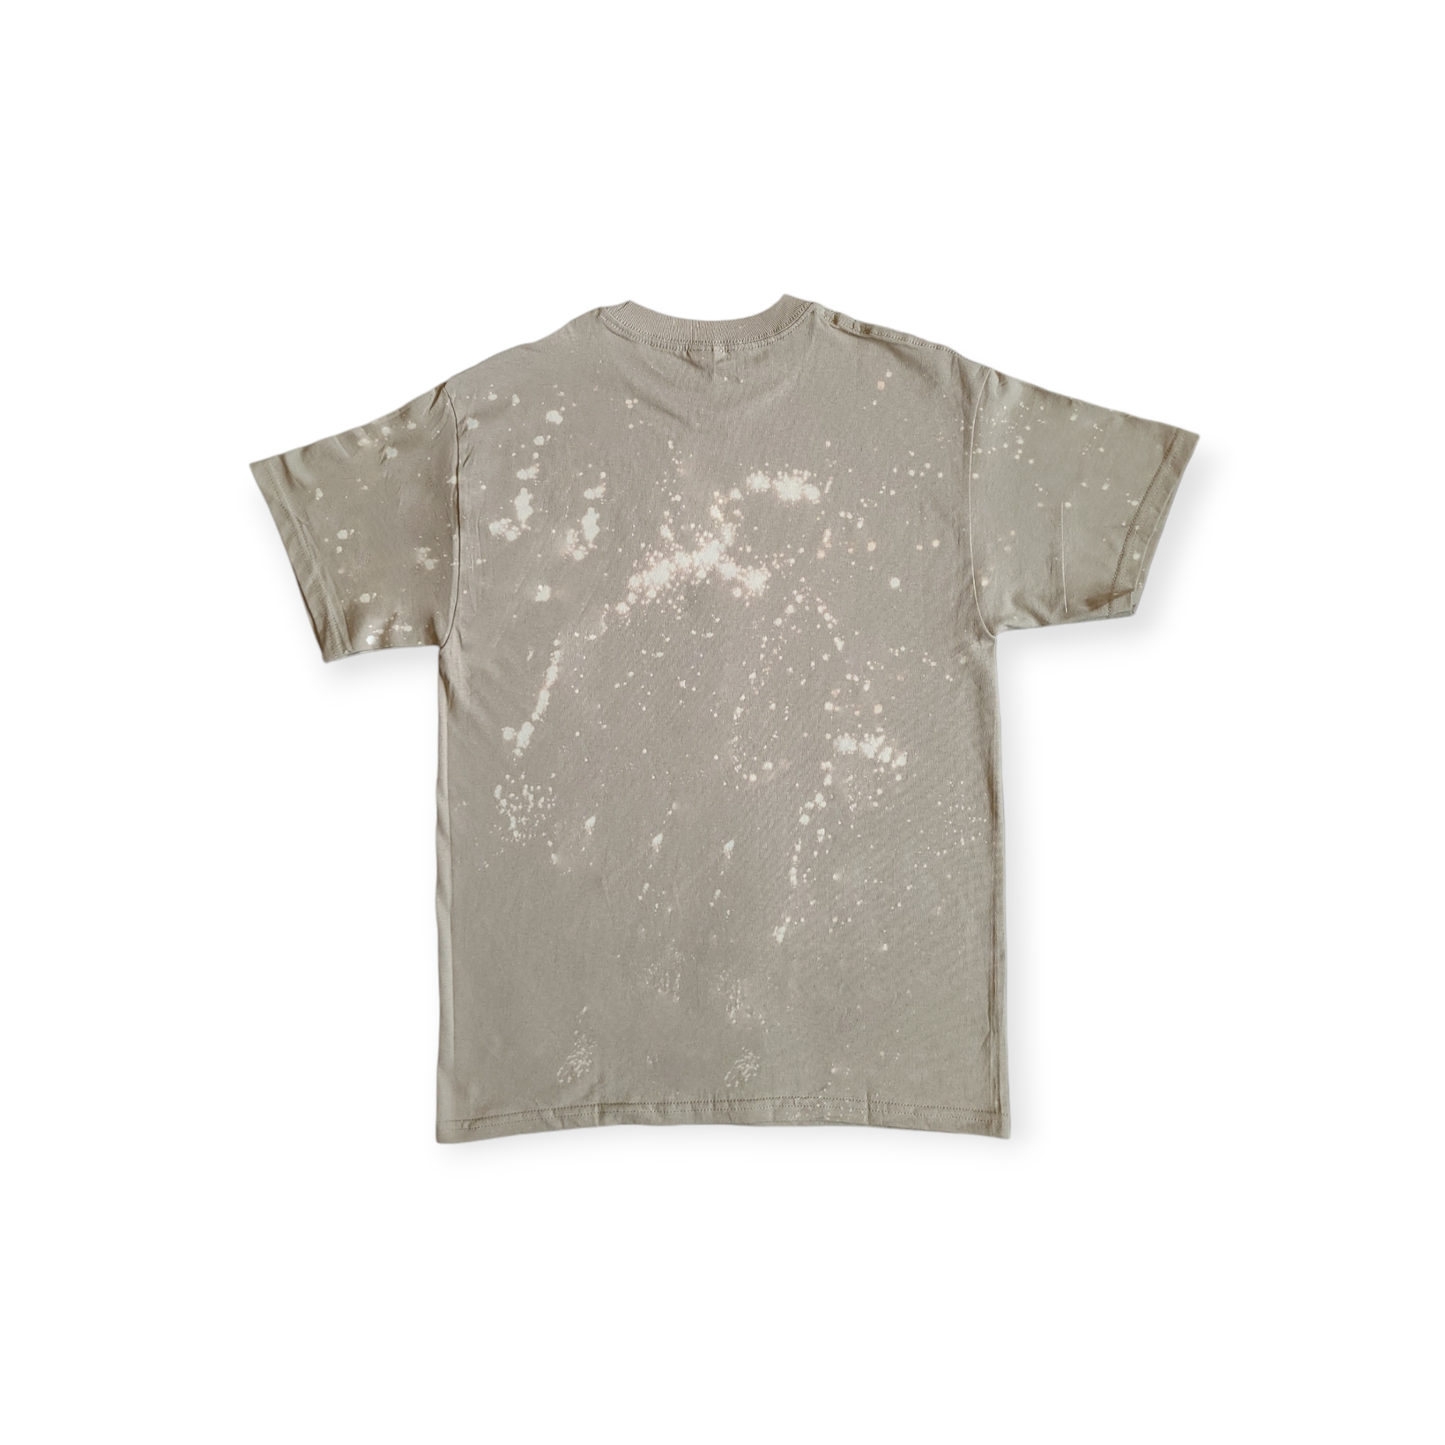 The Stained Brain - Beige Beach (Stained) Unisex T-Shirt